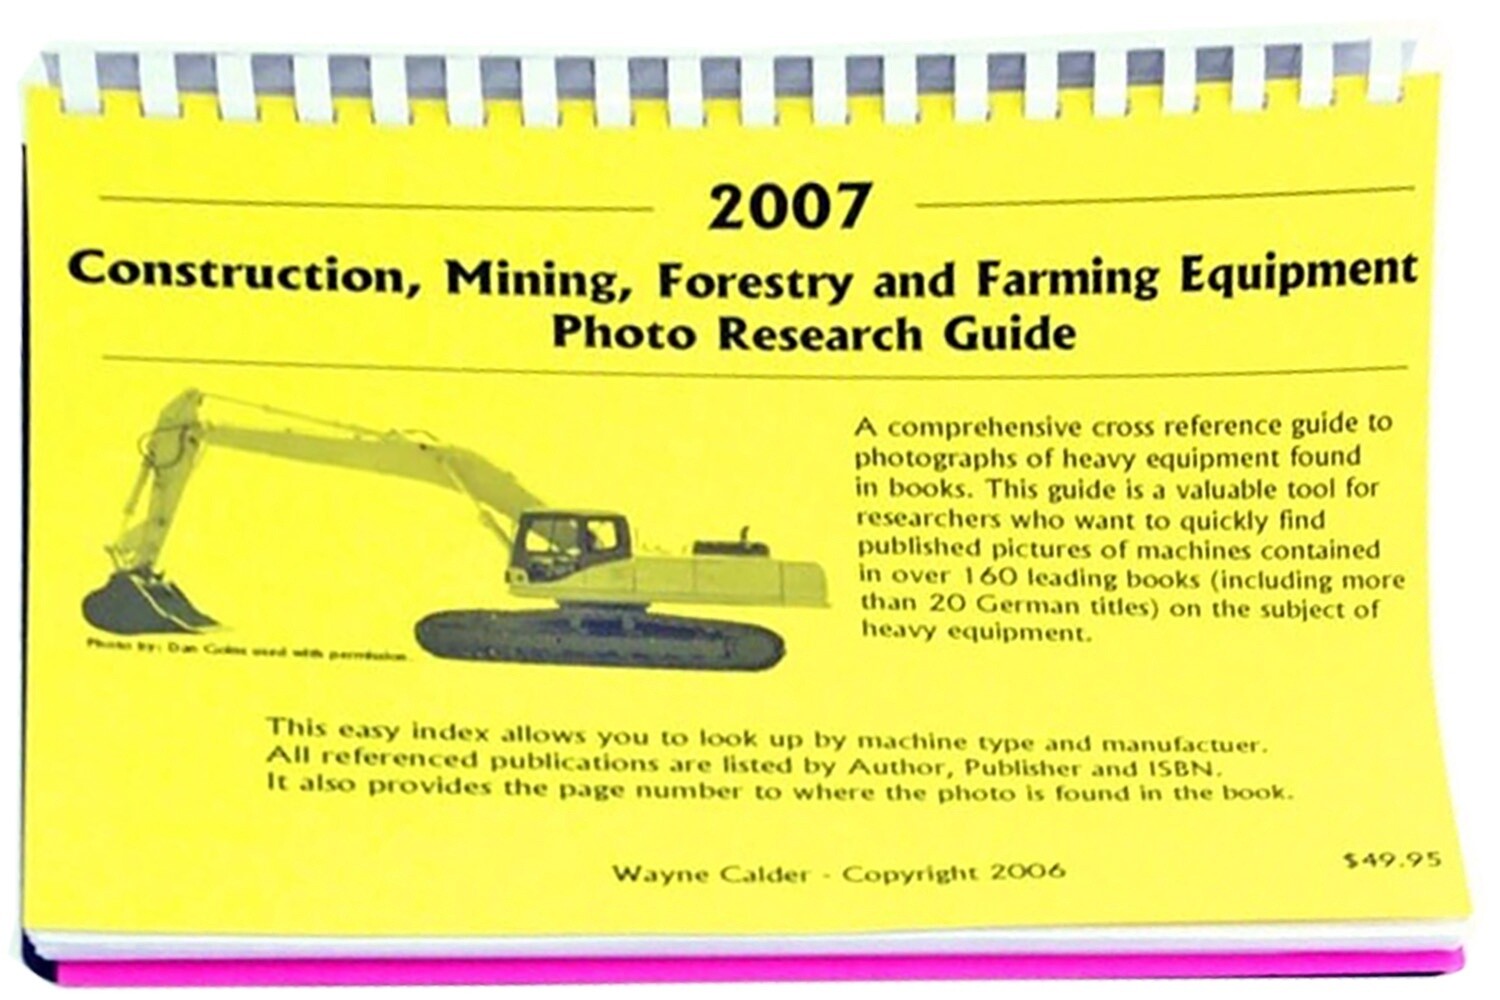 Heavy Equipment Photo Research Guide - Calder